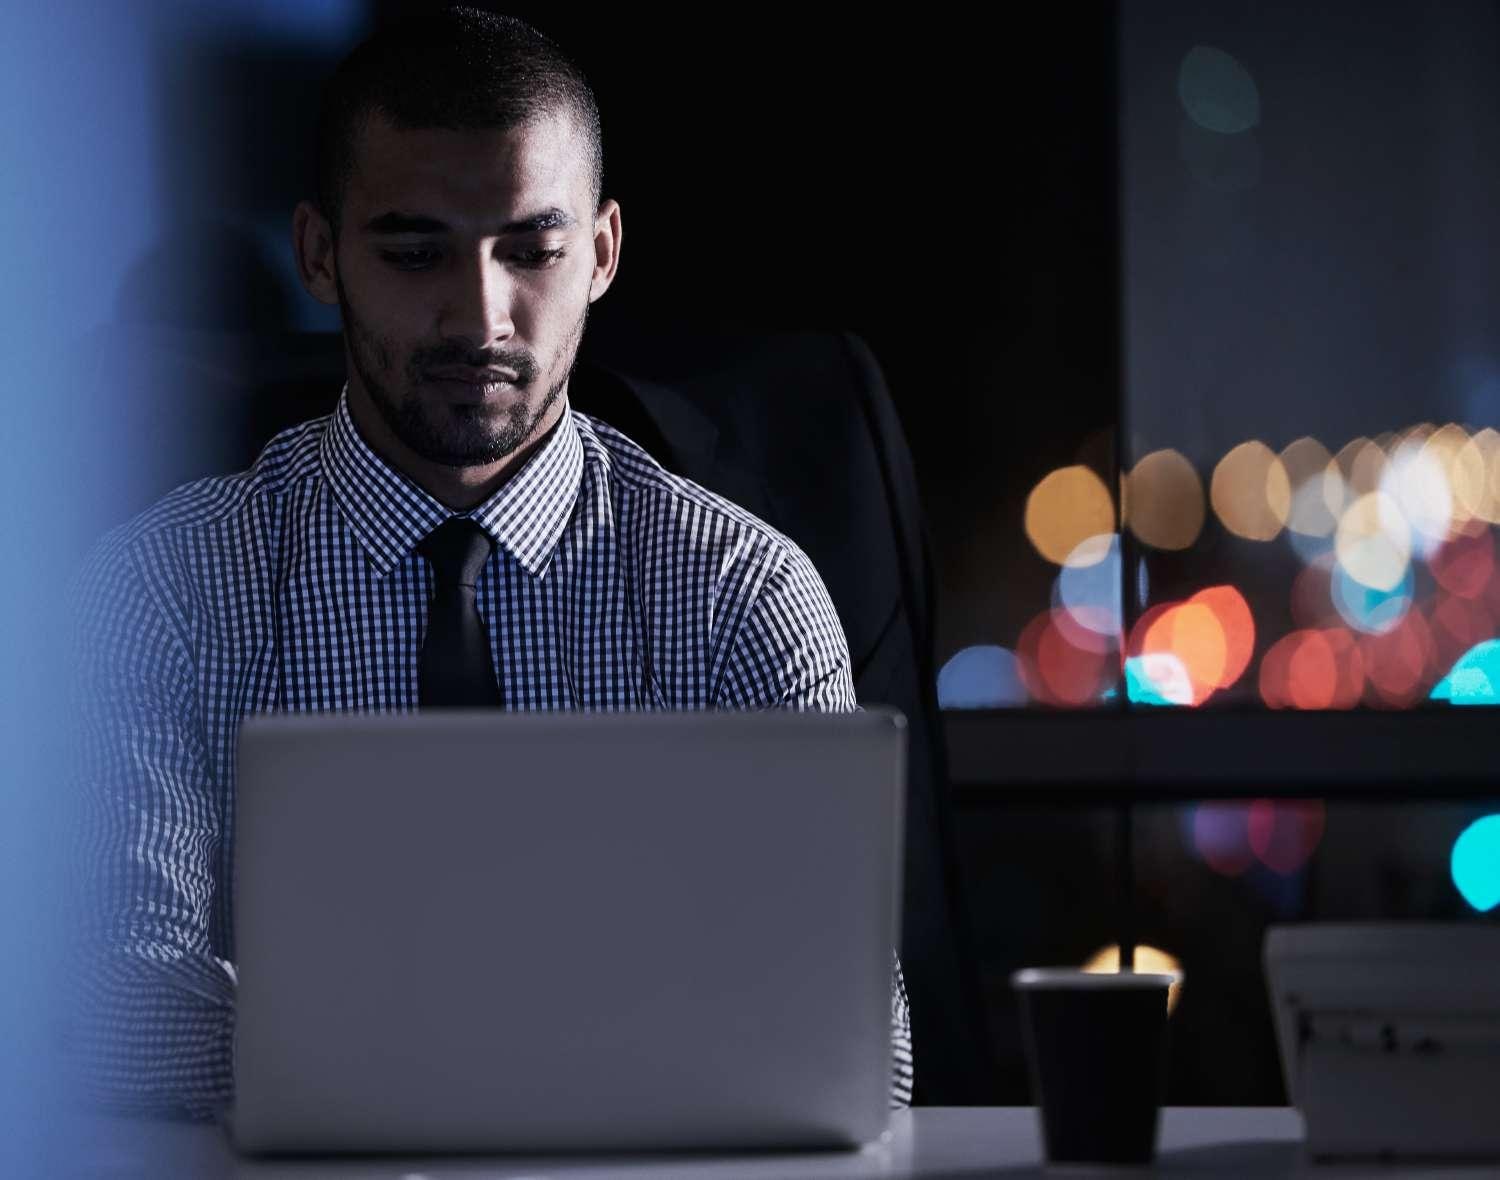 Man with tie on a laptop at night